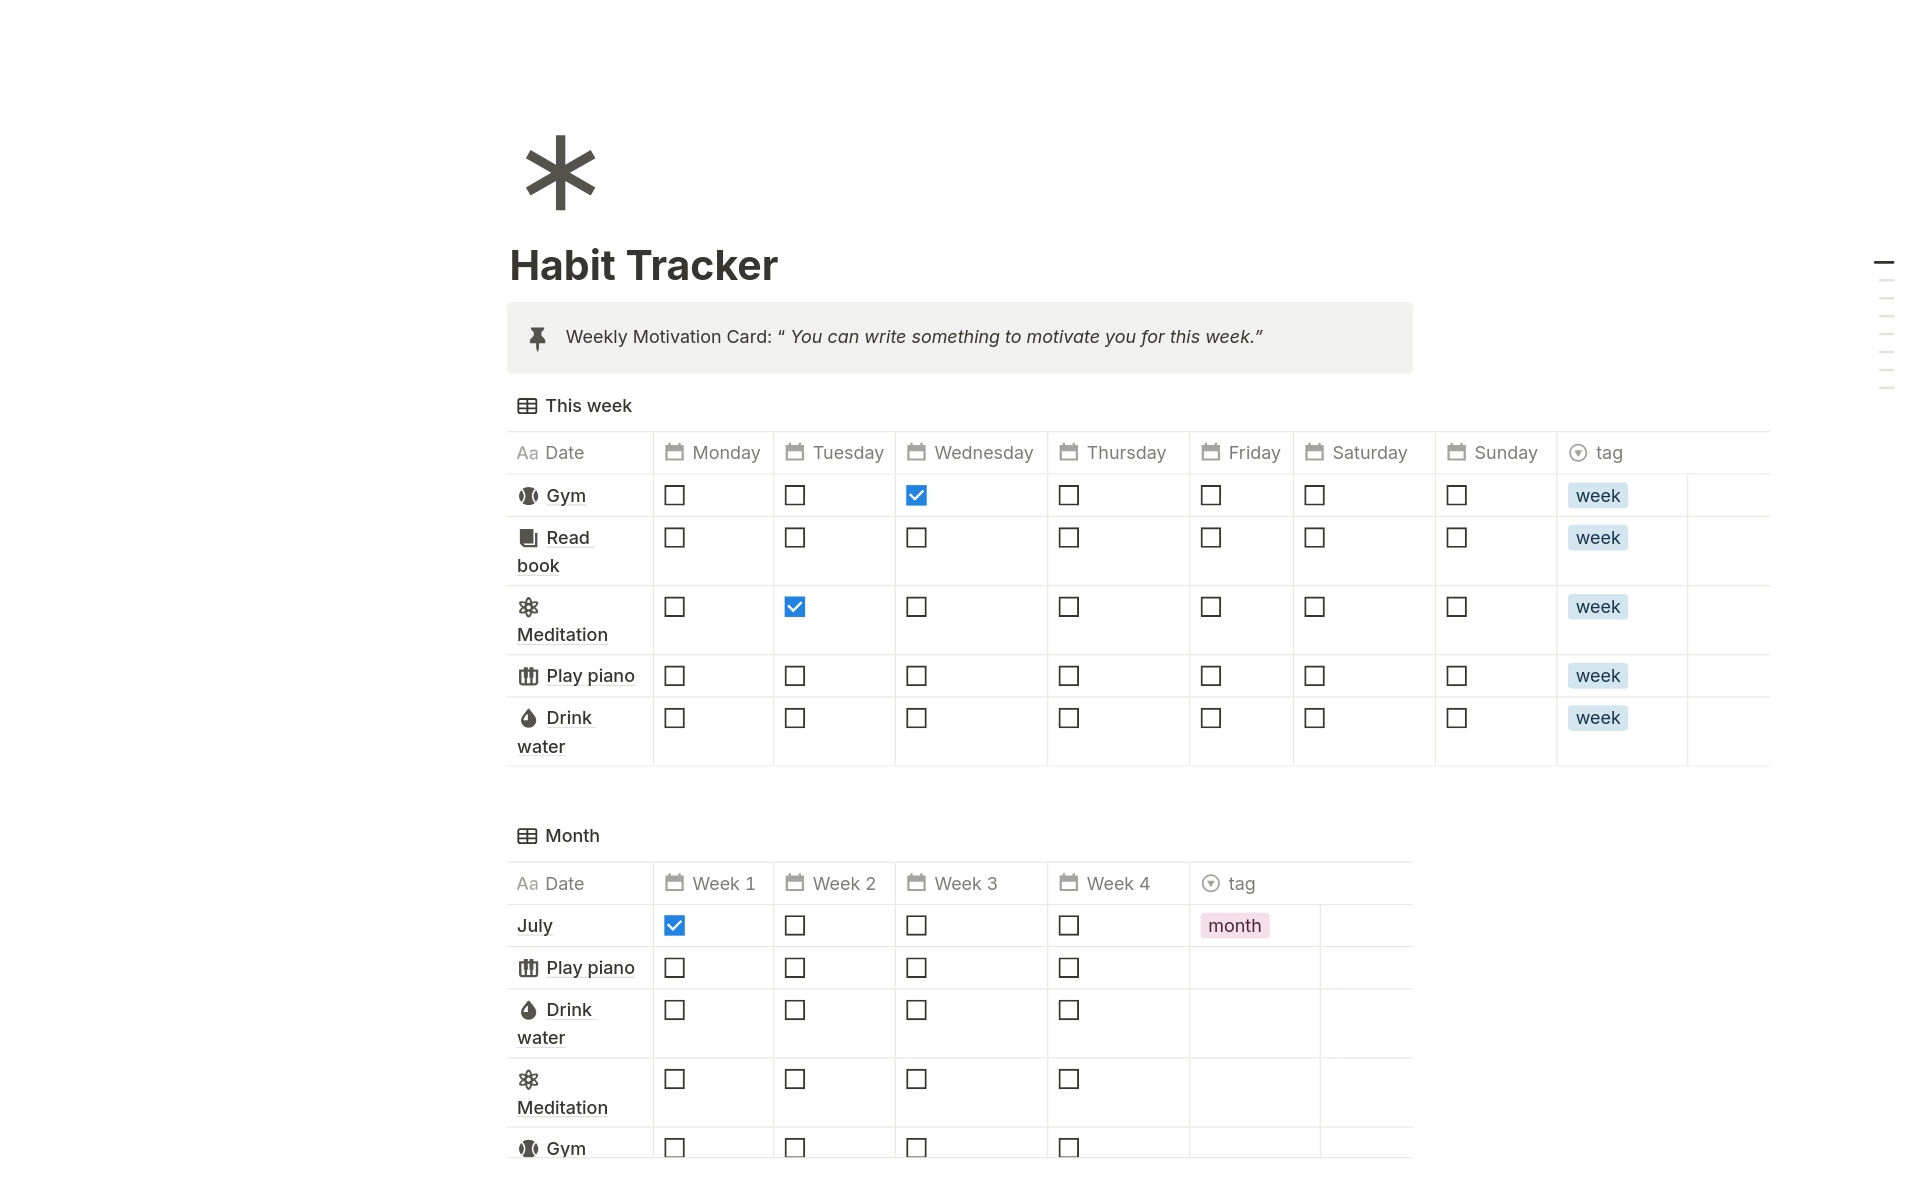 Transform your routine and start building better habits today with our Habit Tracker Template. Take control of your personal growth journey and see the progress in real-time. Ready to make a change?